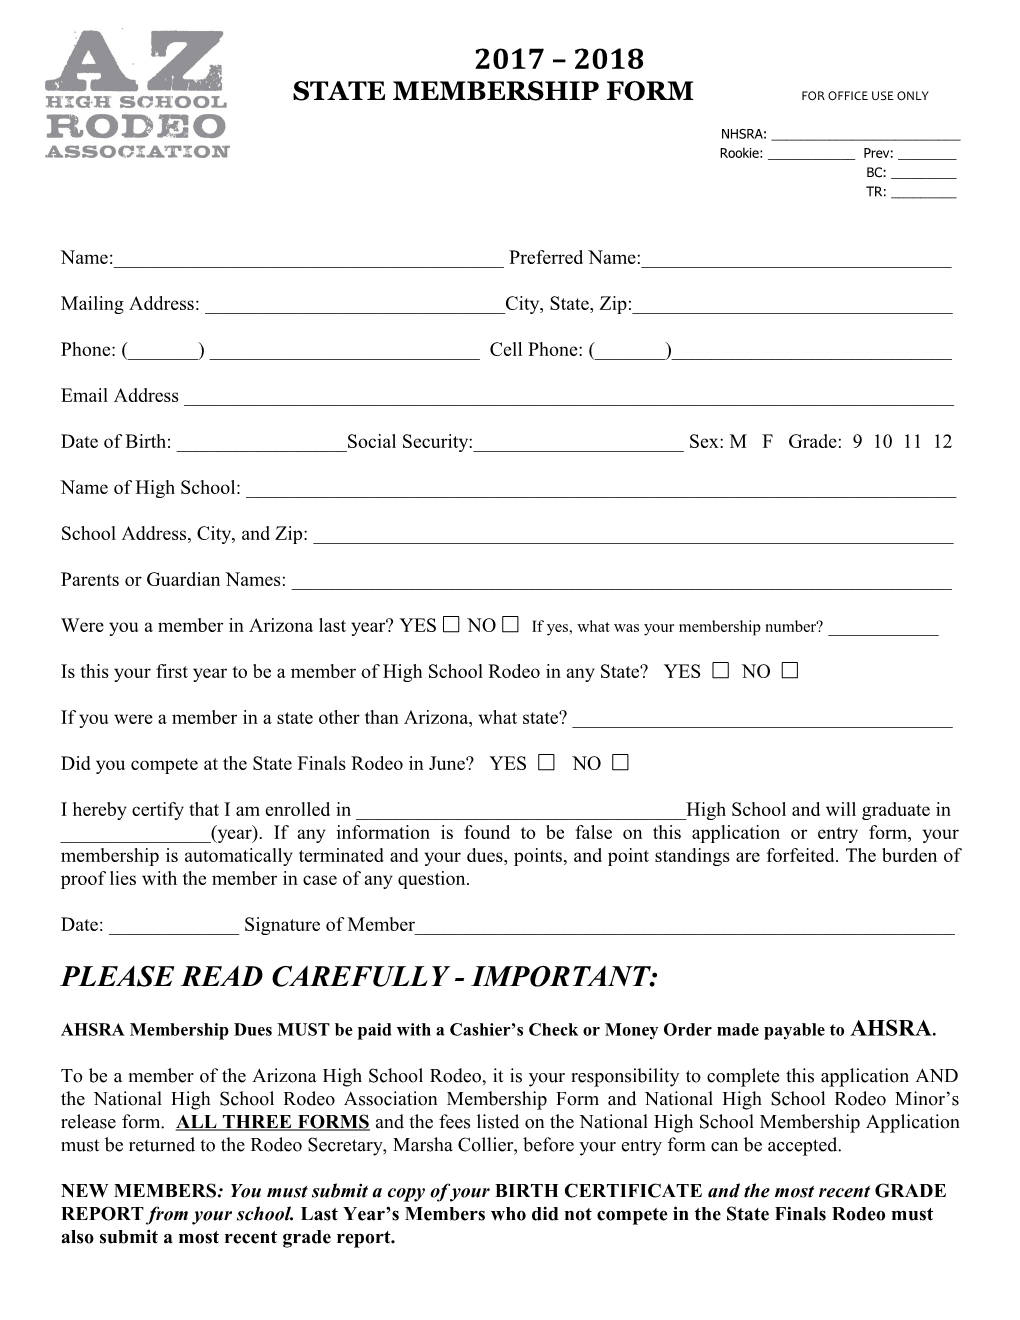 State Membership Form for Office Use Only